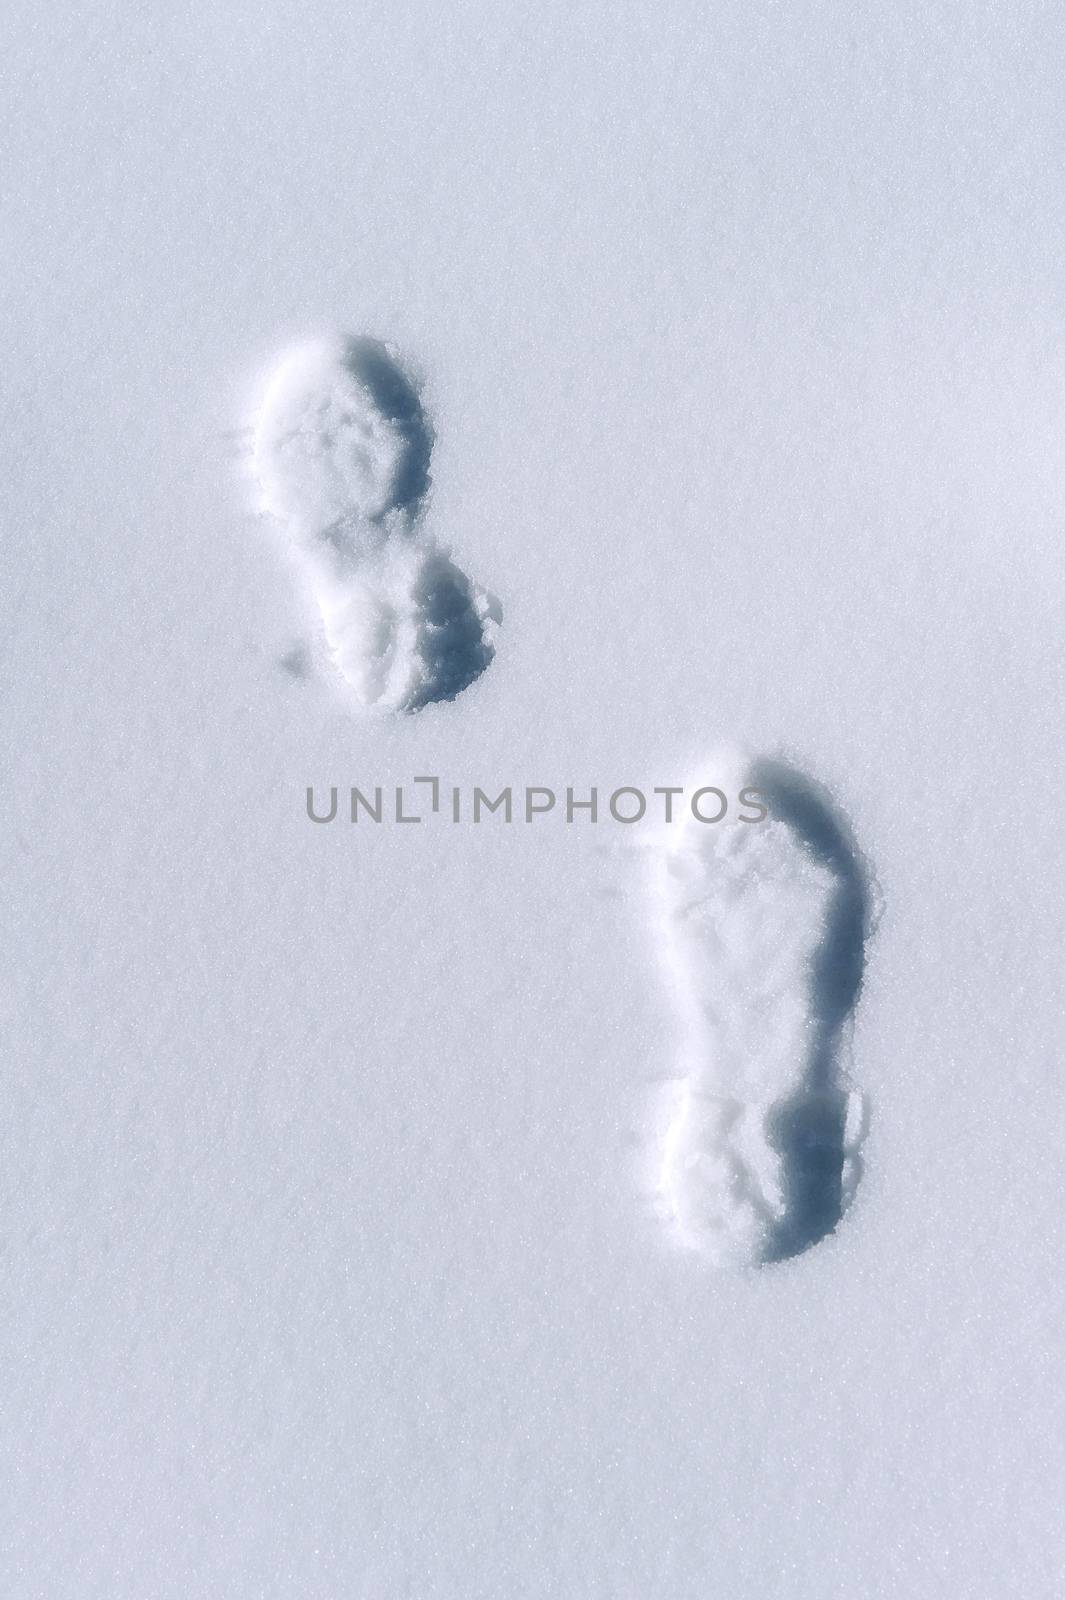 Footprints in snow. by gutarphotoghaphy